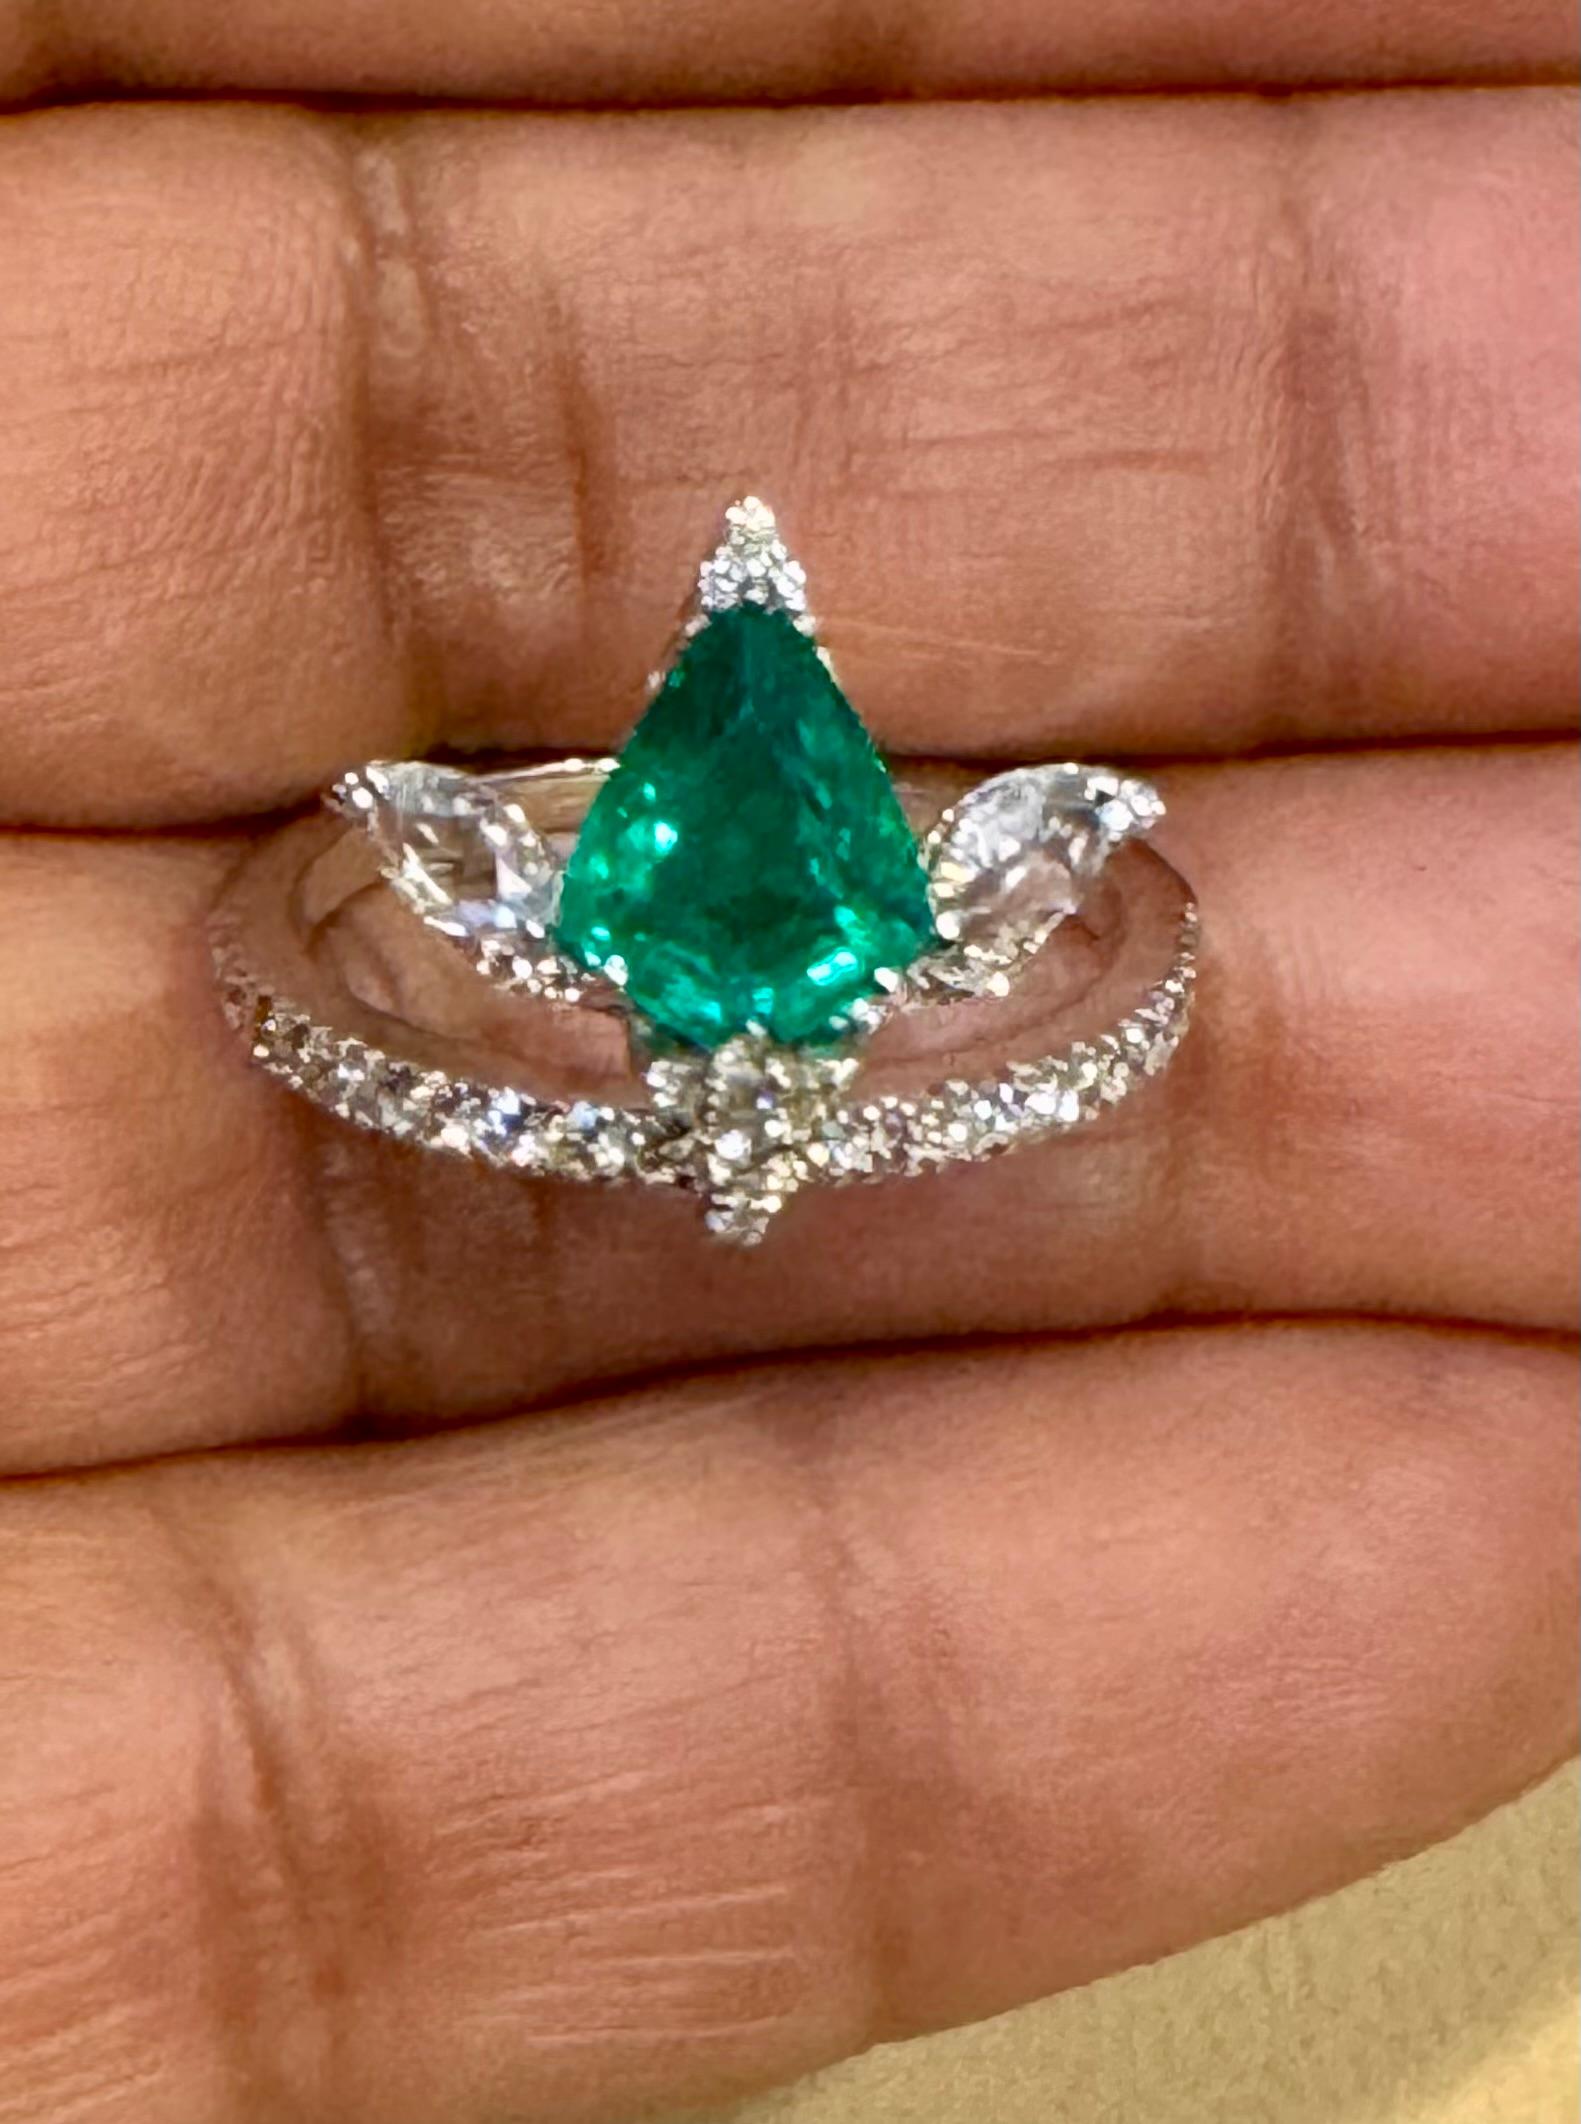 1.2 Ct Finest Zambian Pear Emerald & 1 Ct Diamond Ring in 18 Kt Gold Size 6.5 For Sale 4